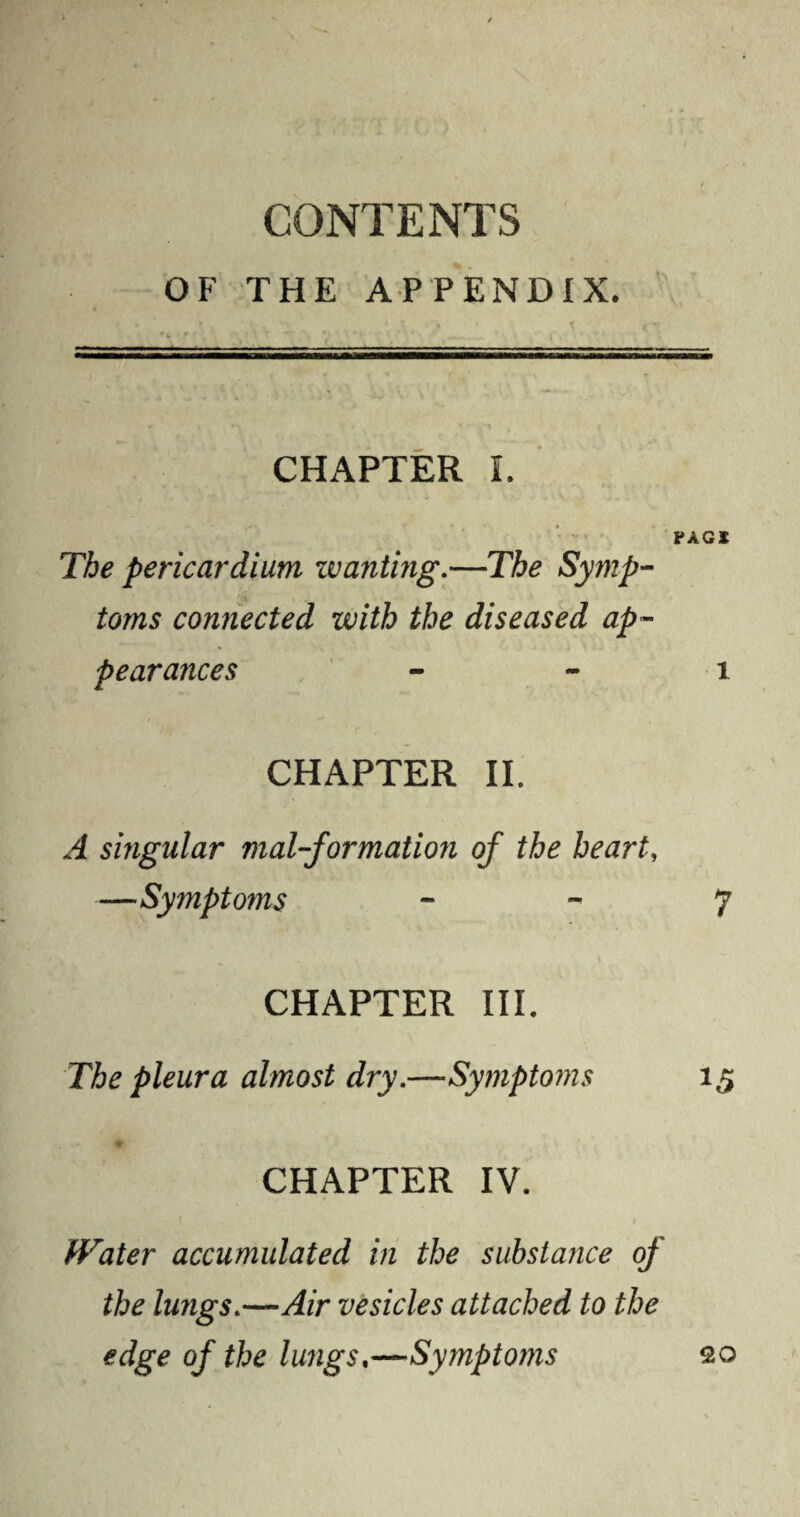 CONTENTS OF THE APPENDIX. CHAPTER I. PAG I The pericardium wanting.—The Symp- toms connected with the diseased ap¬ pearances i CHAPTER II. A singular mal-formation of the heart, —Symptoms 7 CHAPTER III. The pleura almost dry.—-Symptoms 15 CHAPTER IV. Water accumulated in the substance of the lungs.—Air vesicles attached to the edge of the lungs.—Symptoms OO